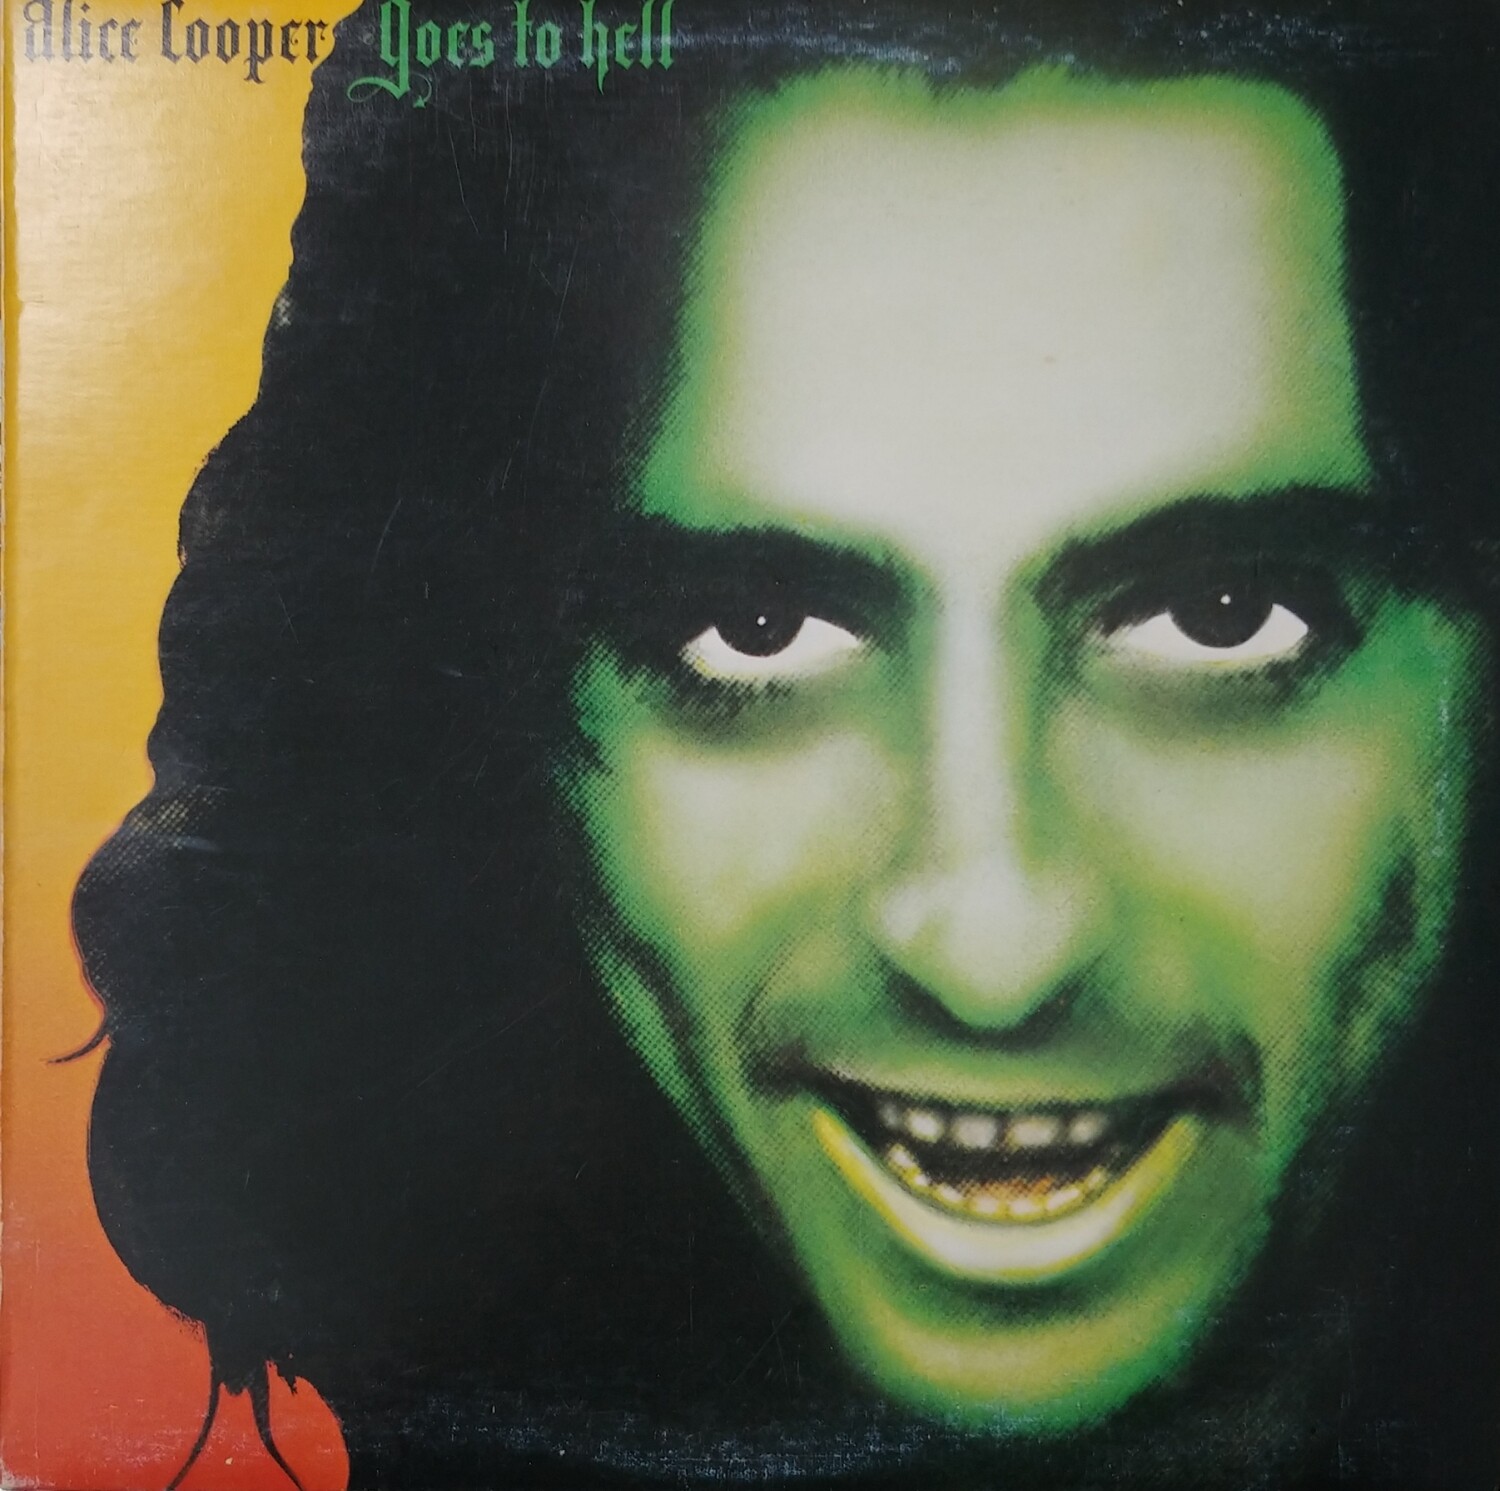 Alice Cooper - Goes to hell